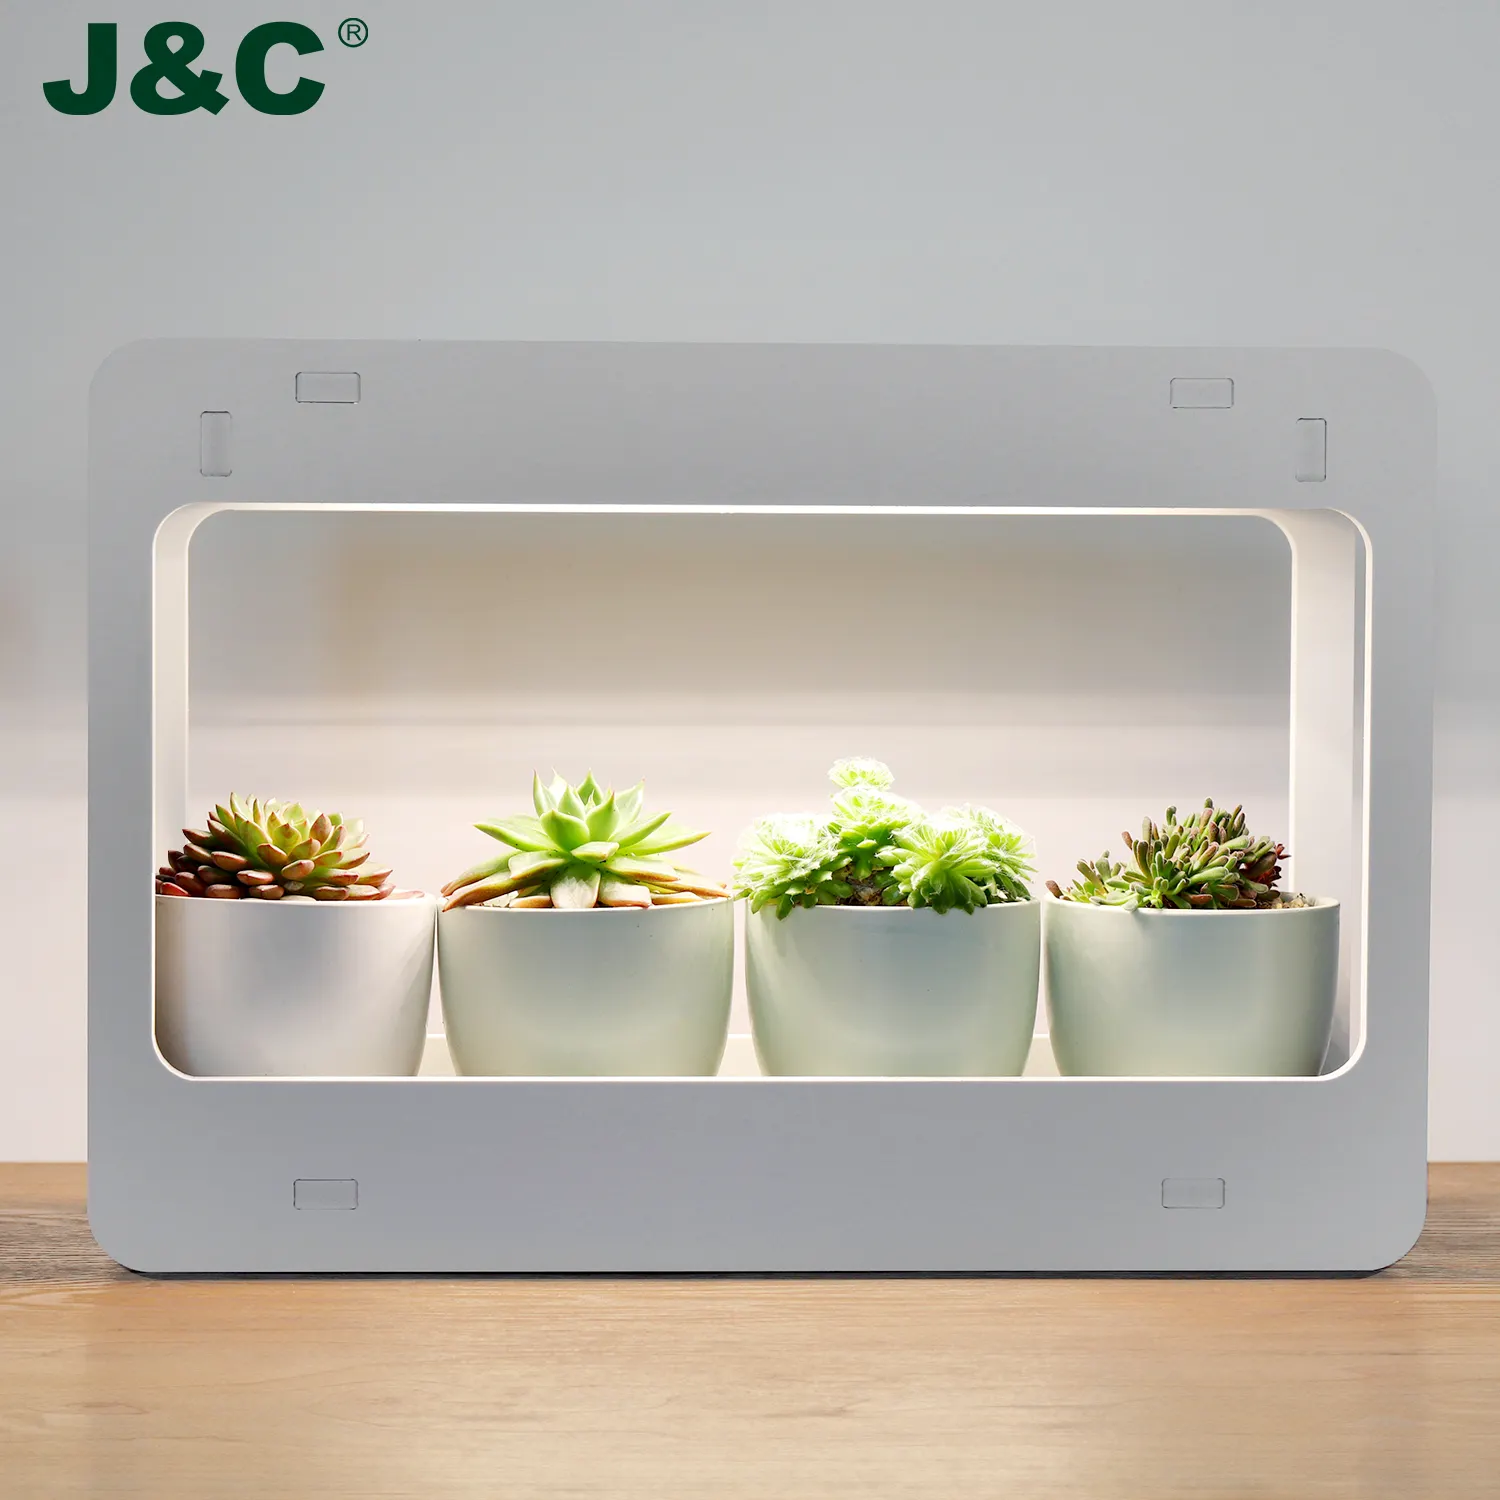 LED Plant grow light indoor garden with Timer DIY decoration small plant grow light indoor flower garden herb growing system